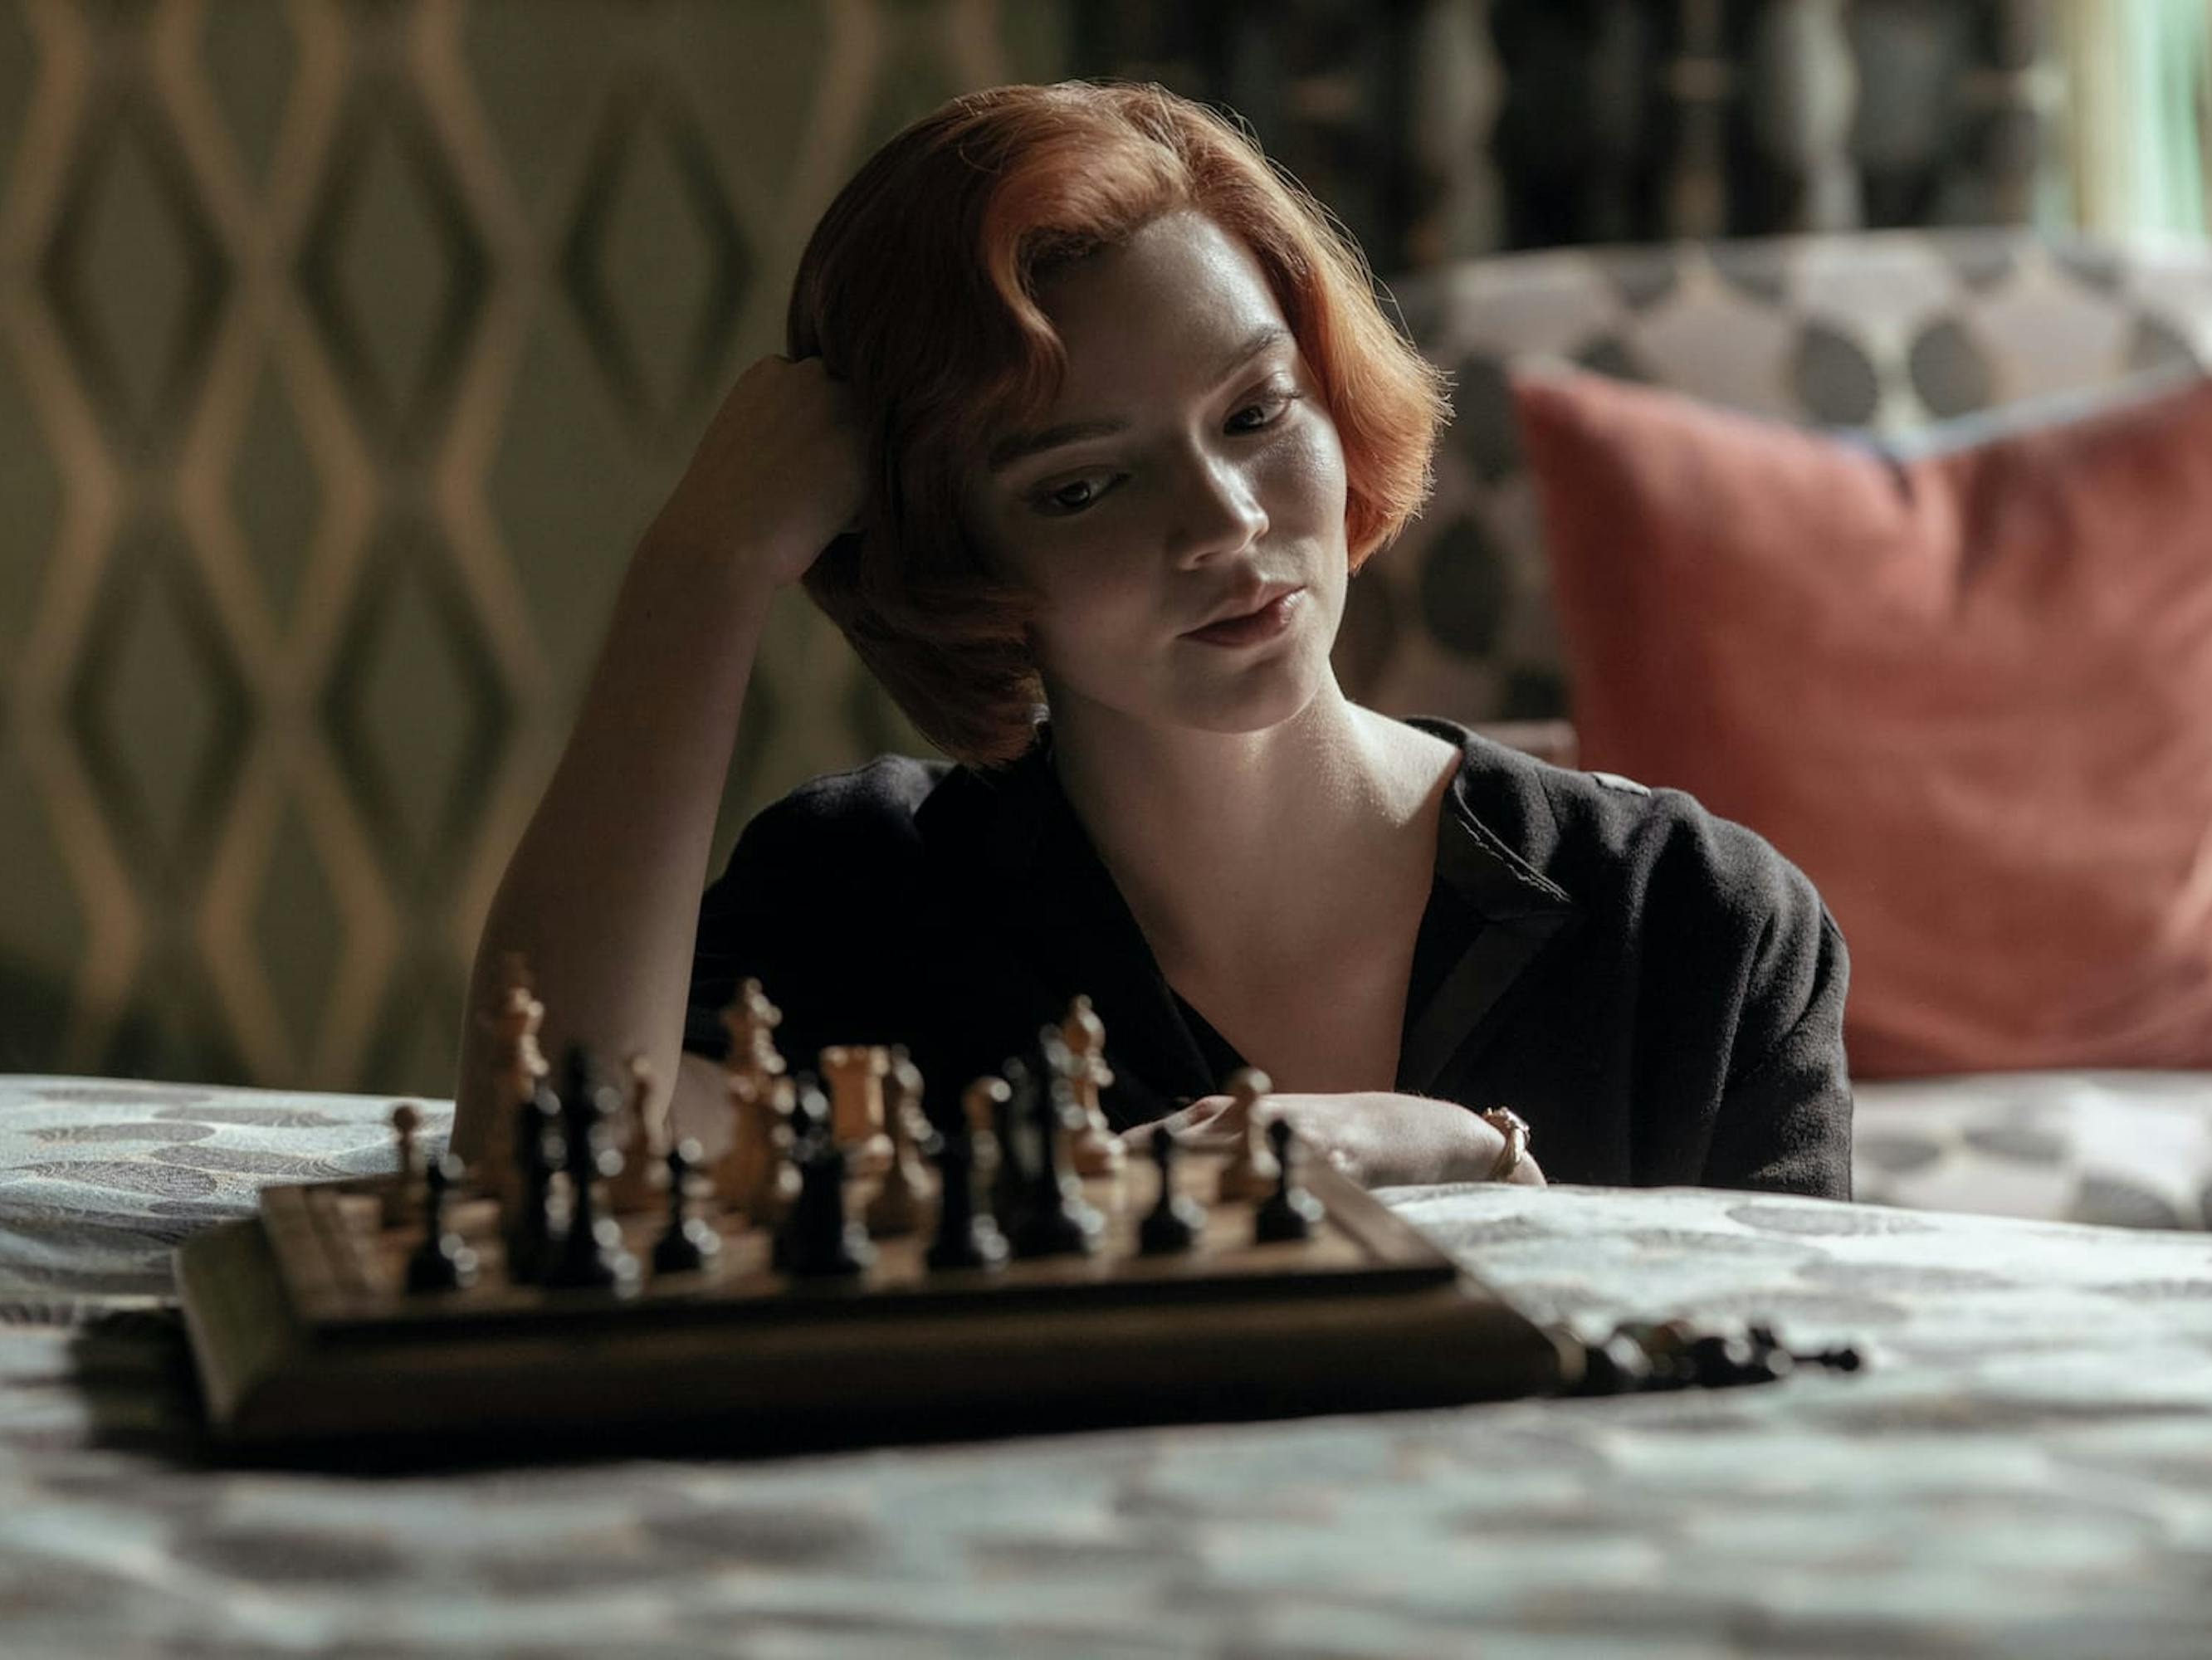 The Story Behind Beth Harmon's Red Hair in “The Queen's Gambit”